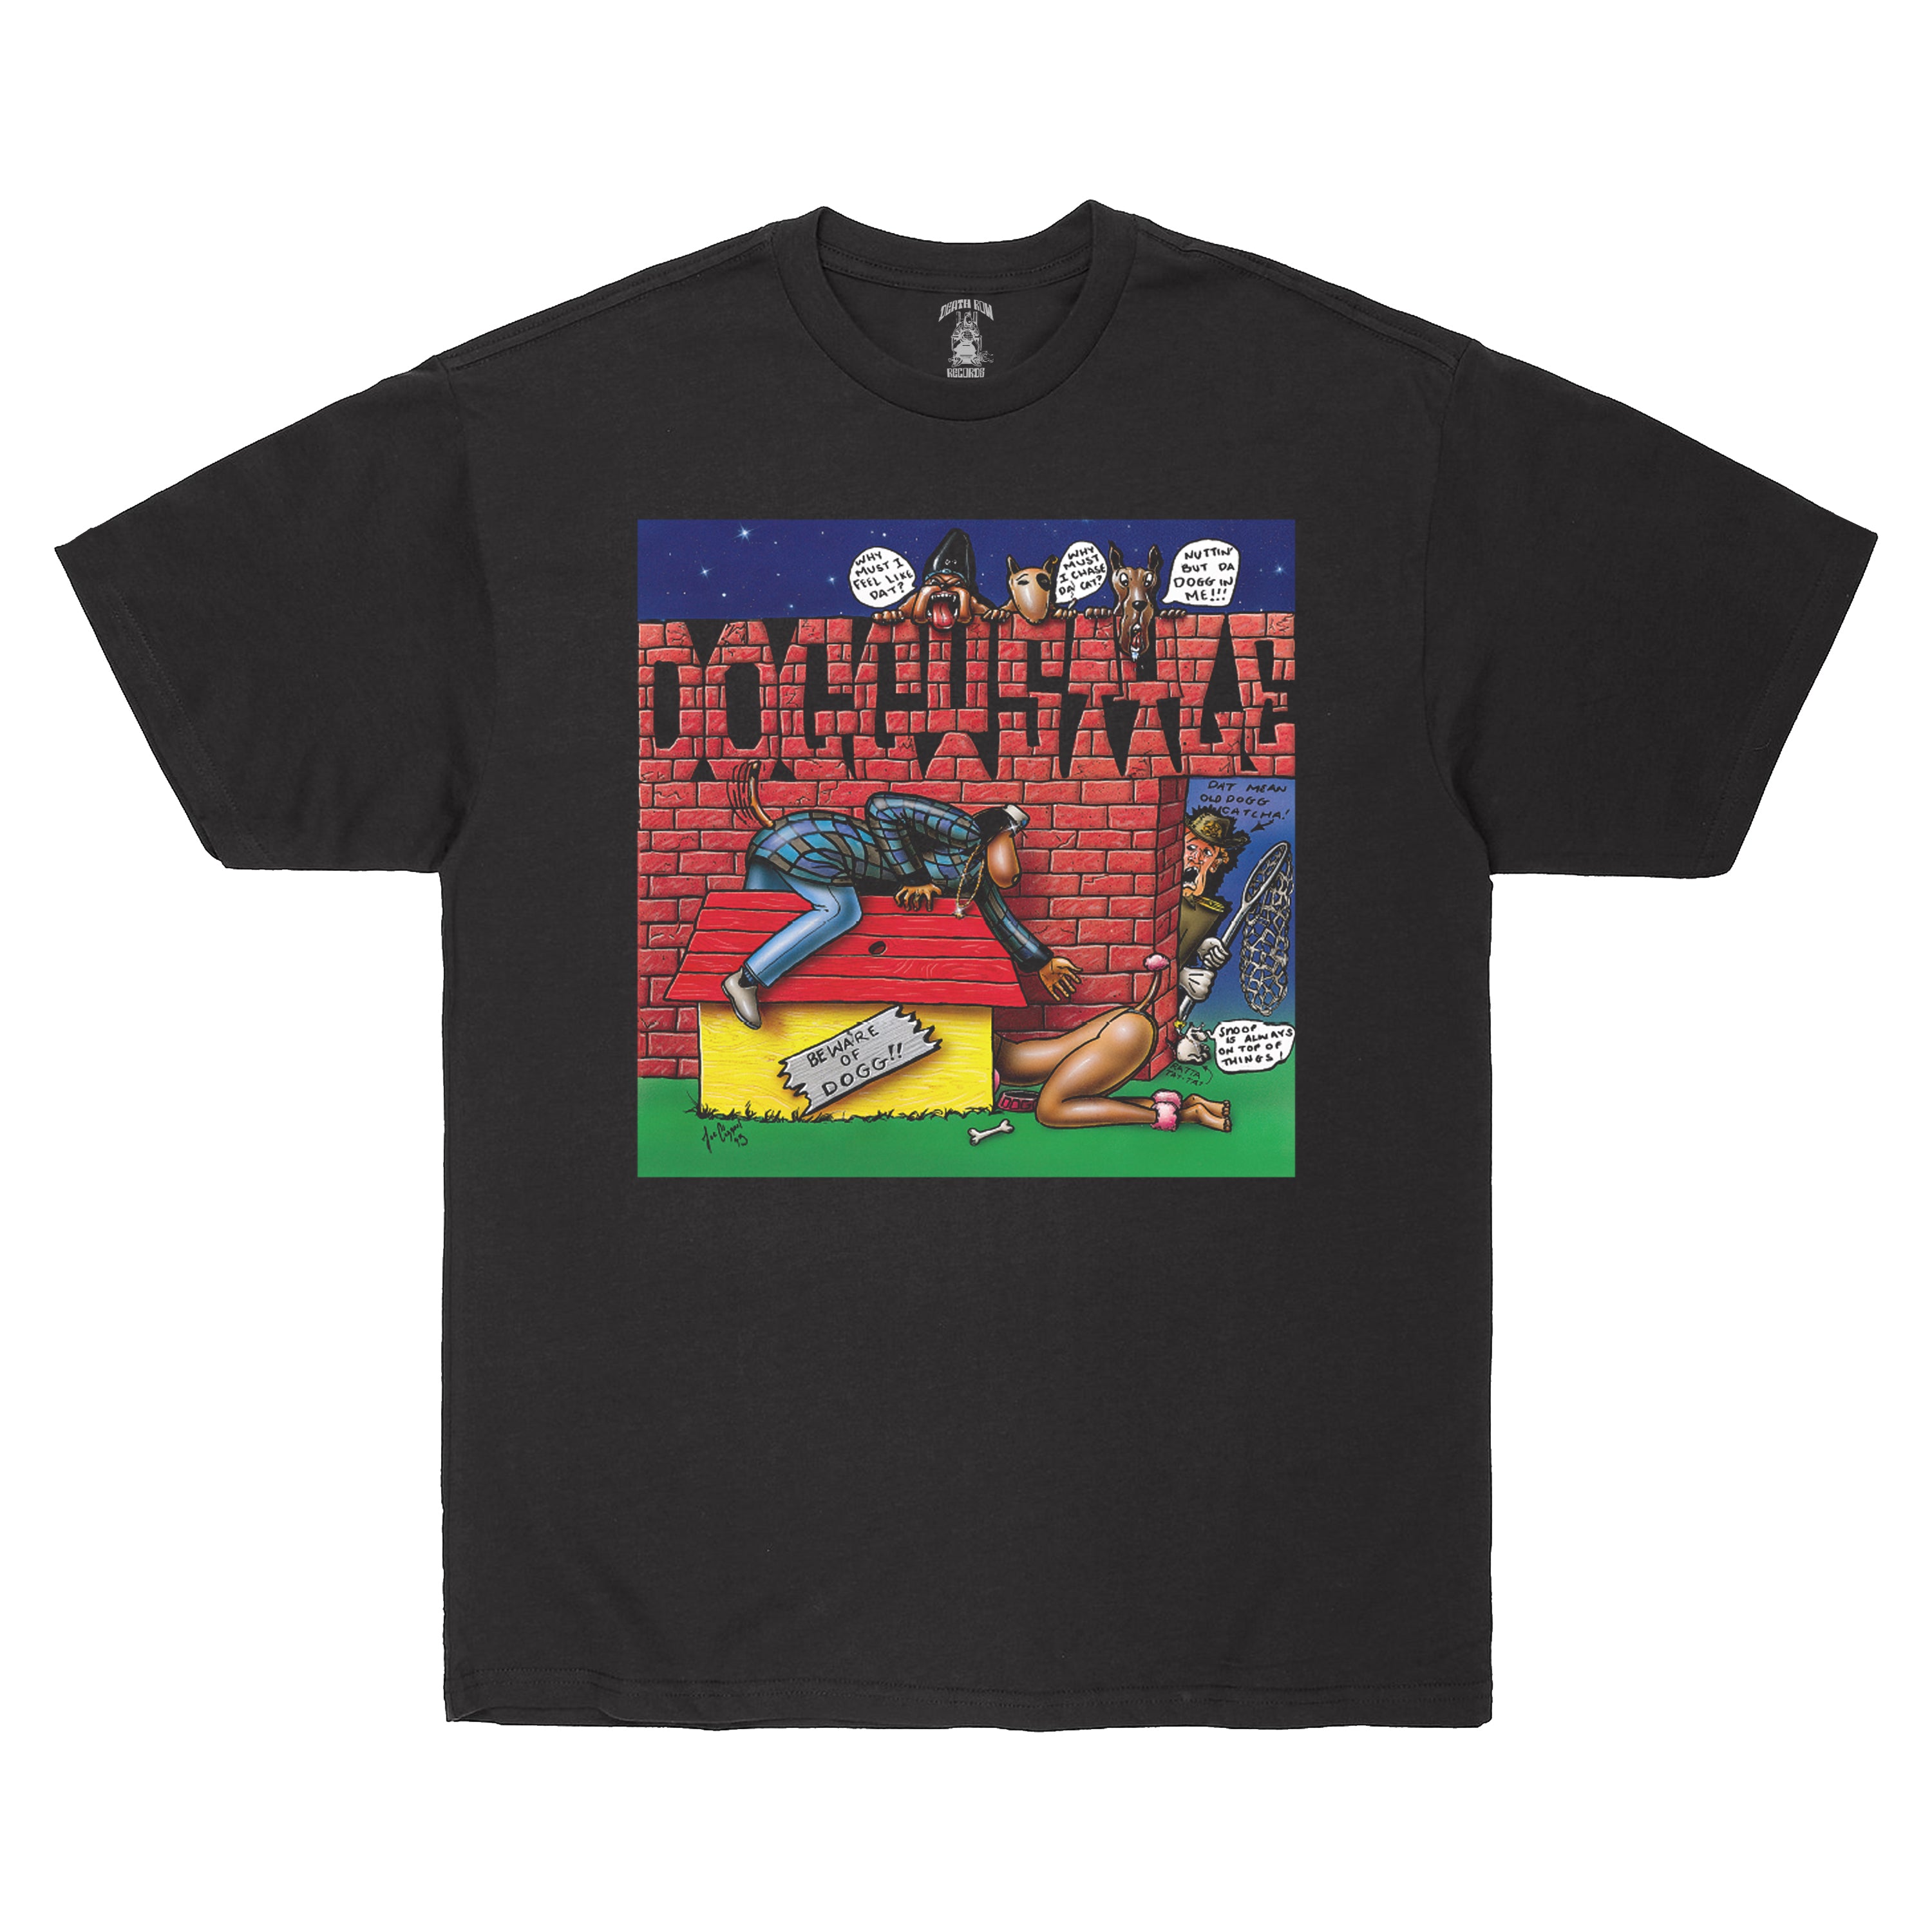 Doggystyle 30 Year Anniversary Album Cover Tee